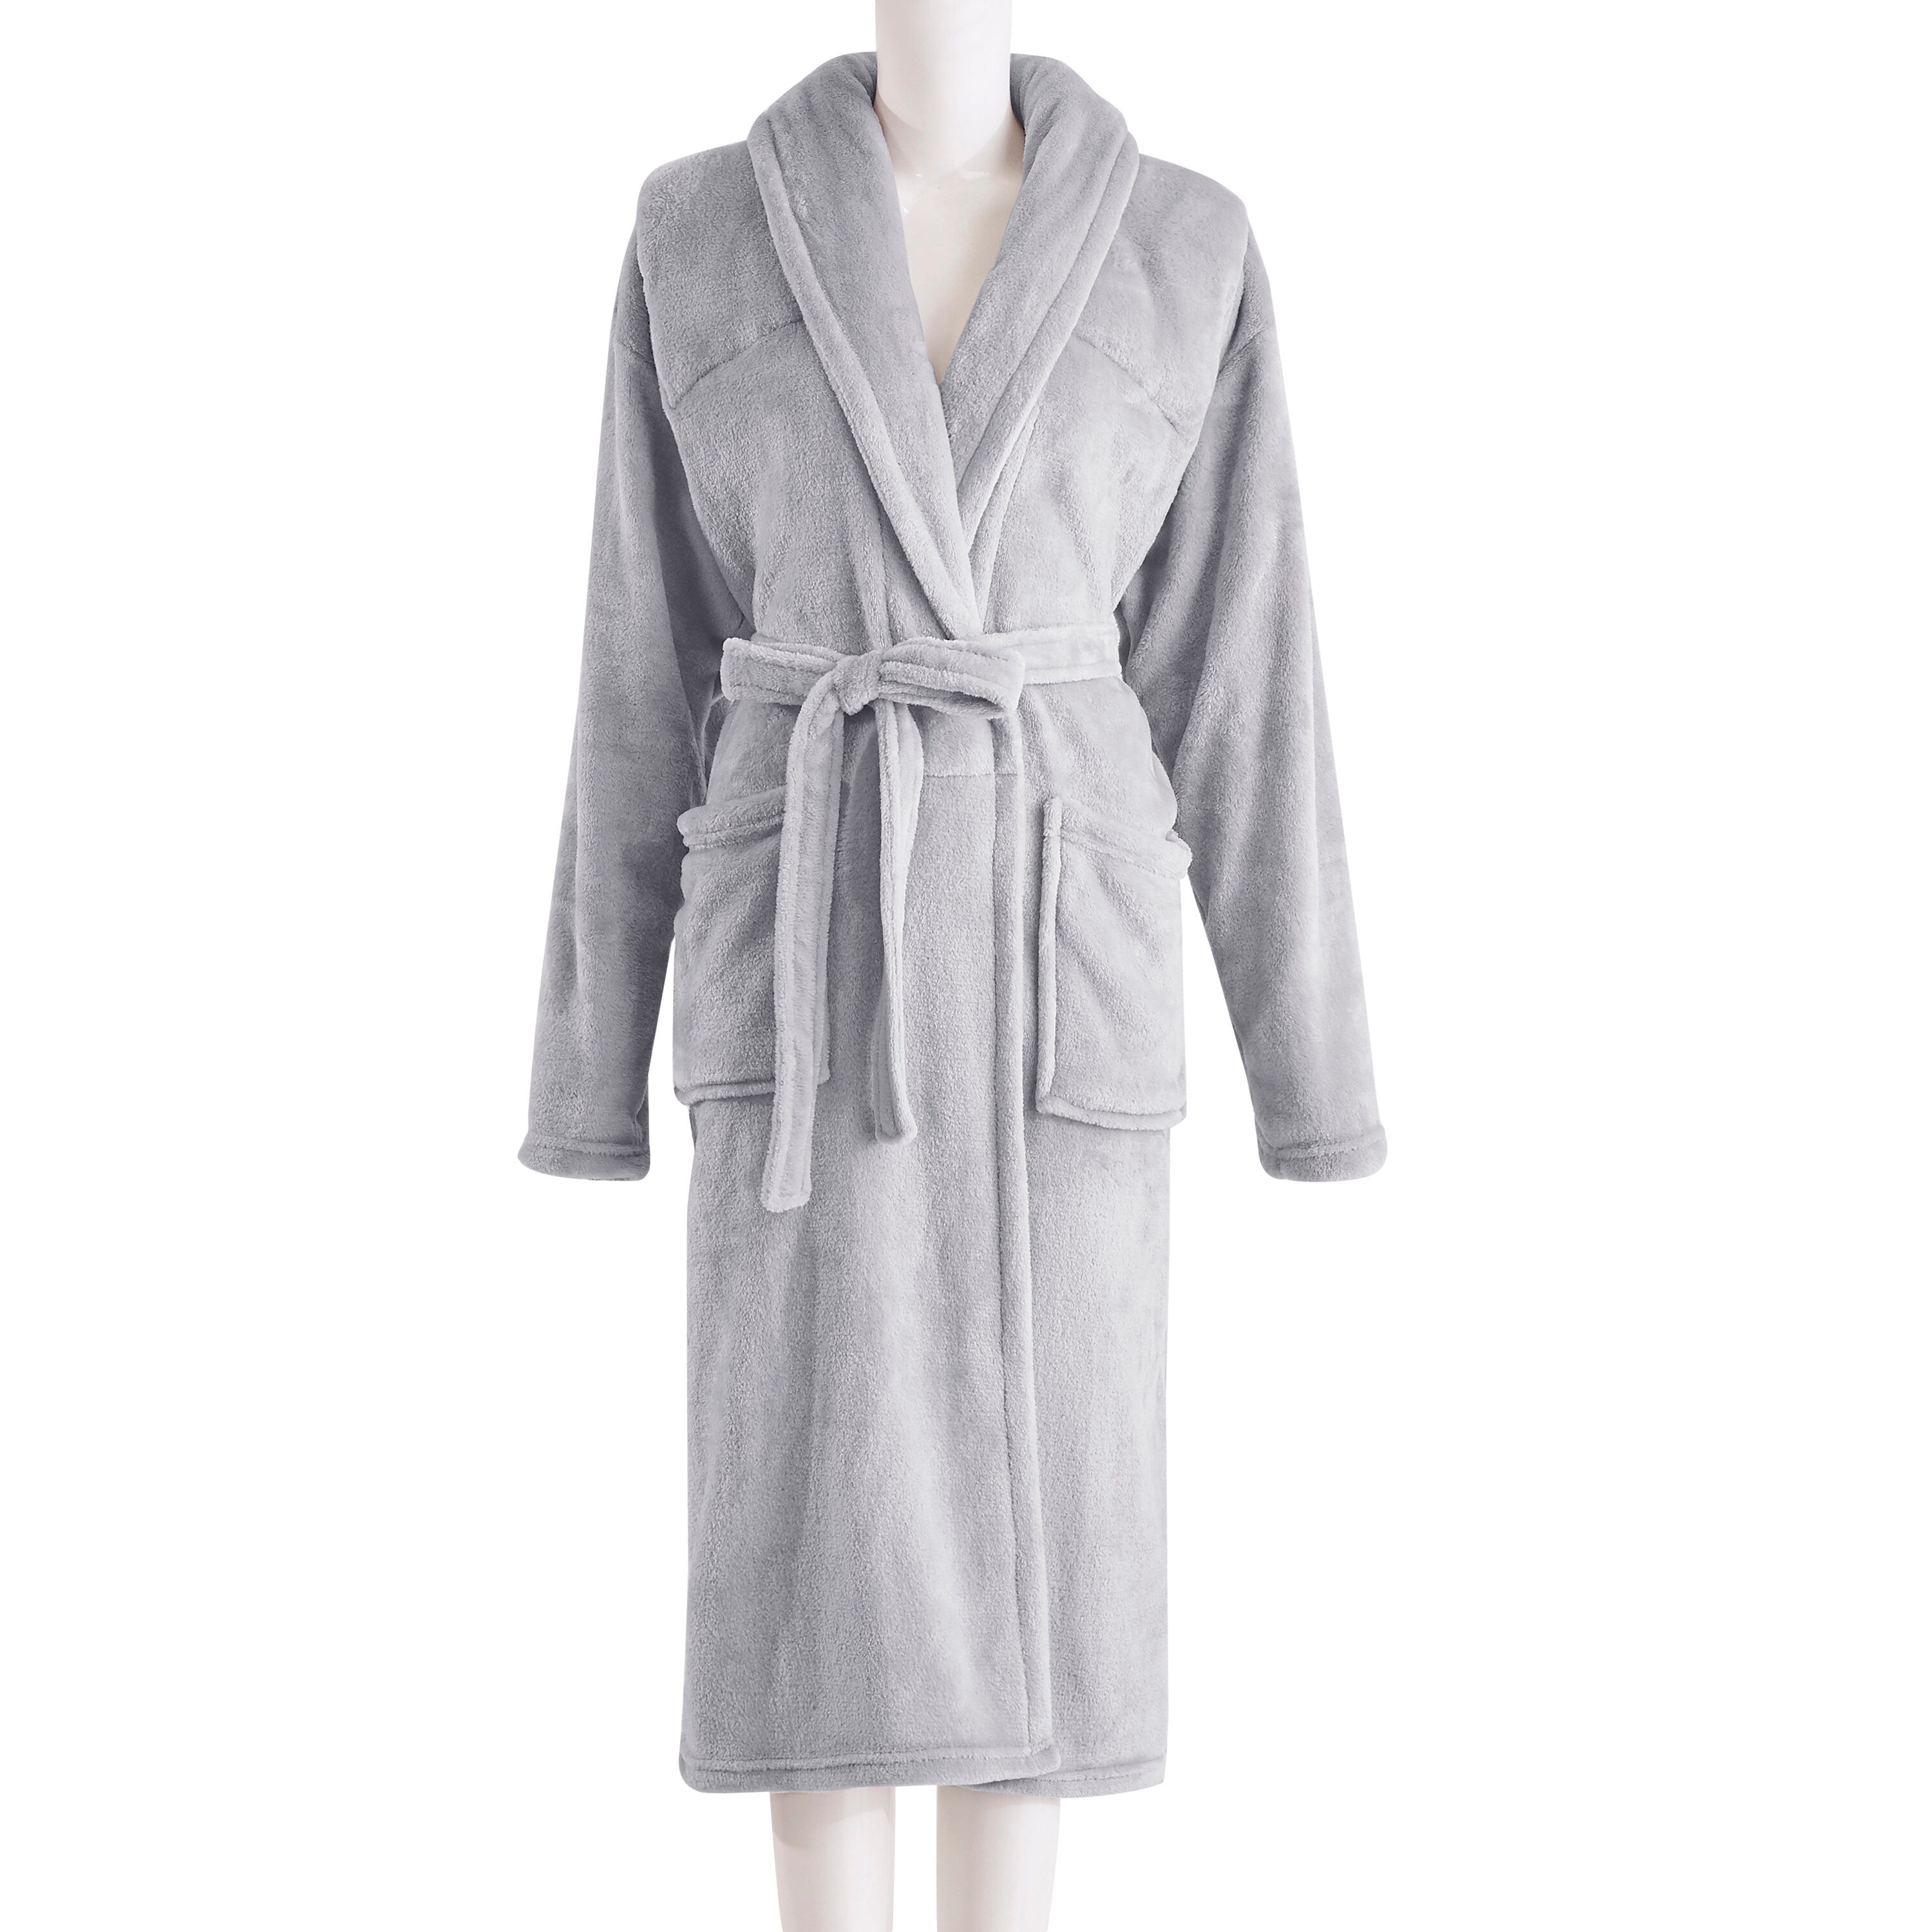 Case Career Sudden descent Sutton Home Medium Unisex Grey Pocketed Solid Polyester Bathrobe in the  Bathrobes department at Lowes.com